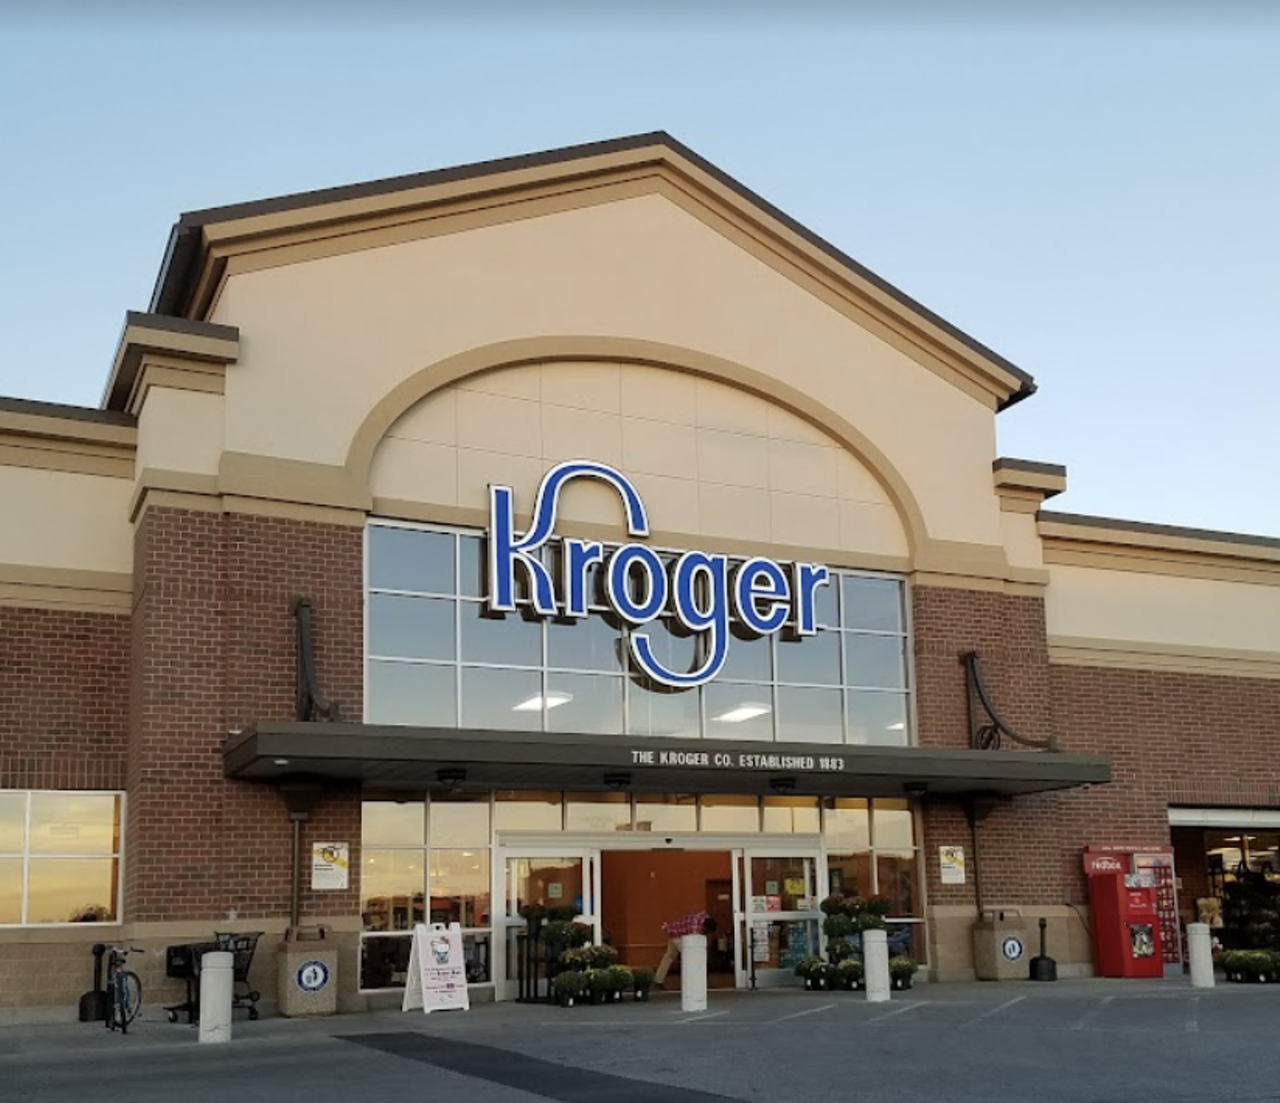 BreckenridgeNickname: Kosher Kroger
Highly regarded. “Breckinridge/McMahan Kroger has never let me down. I was once chased by a very strung out homeless man in the parking lot. But the actual inside of the Kroger is always great.” -Reddit user superfreaksneverdie.